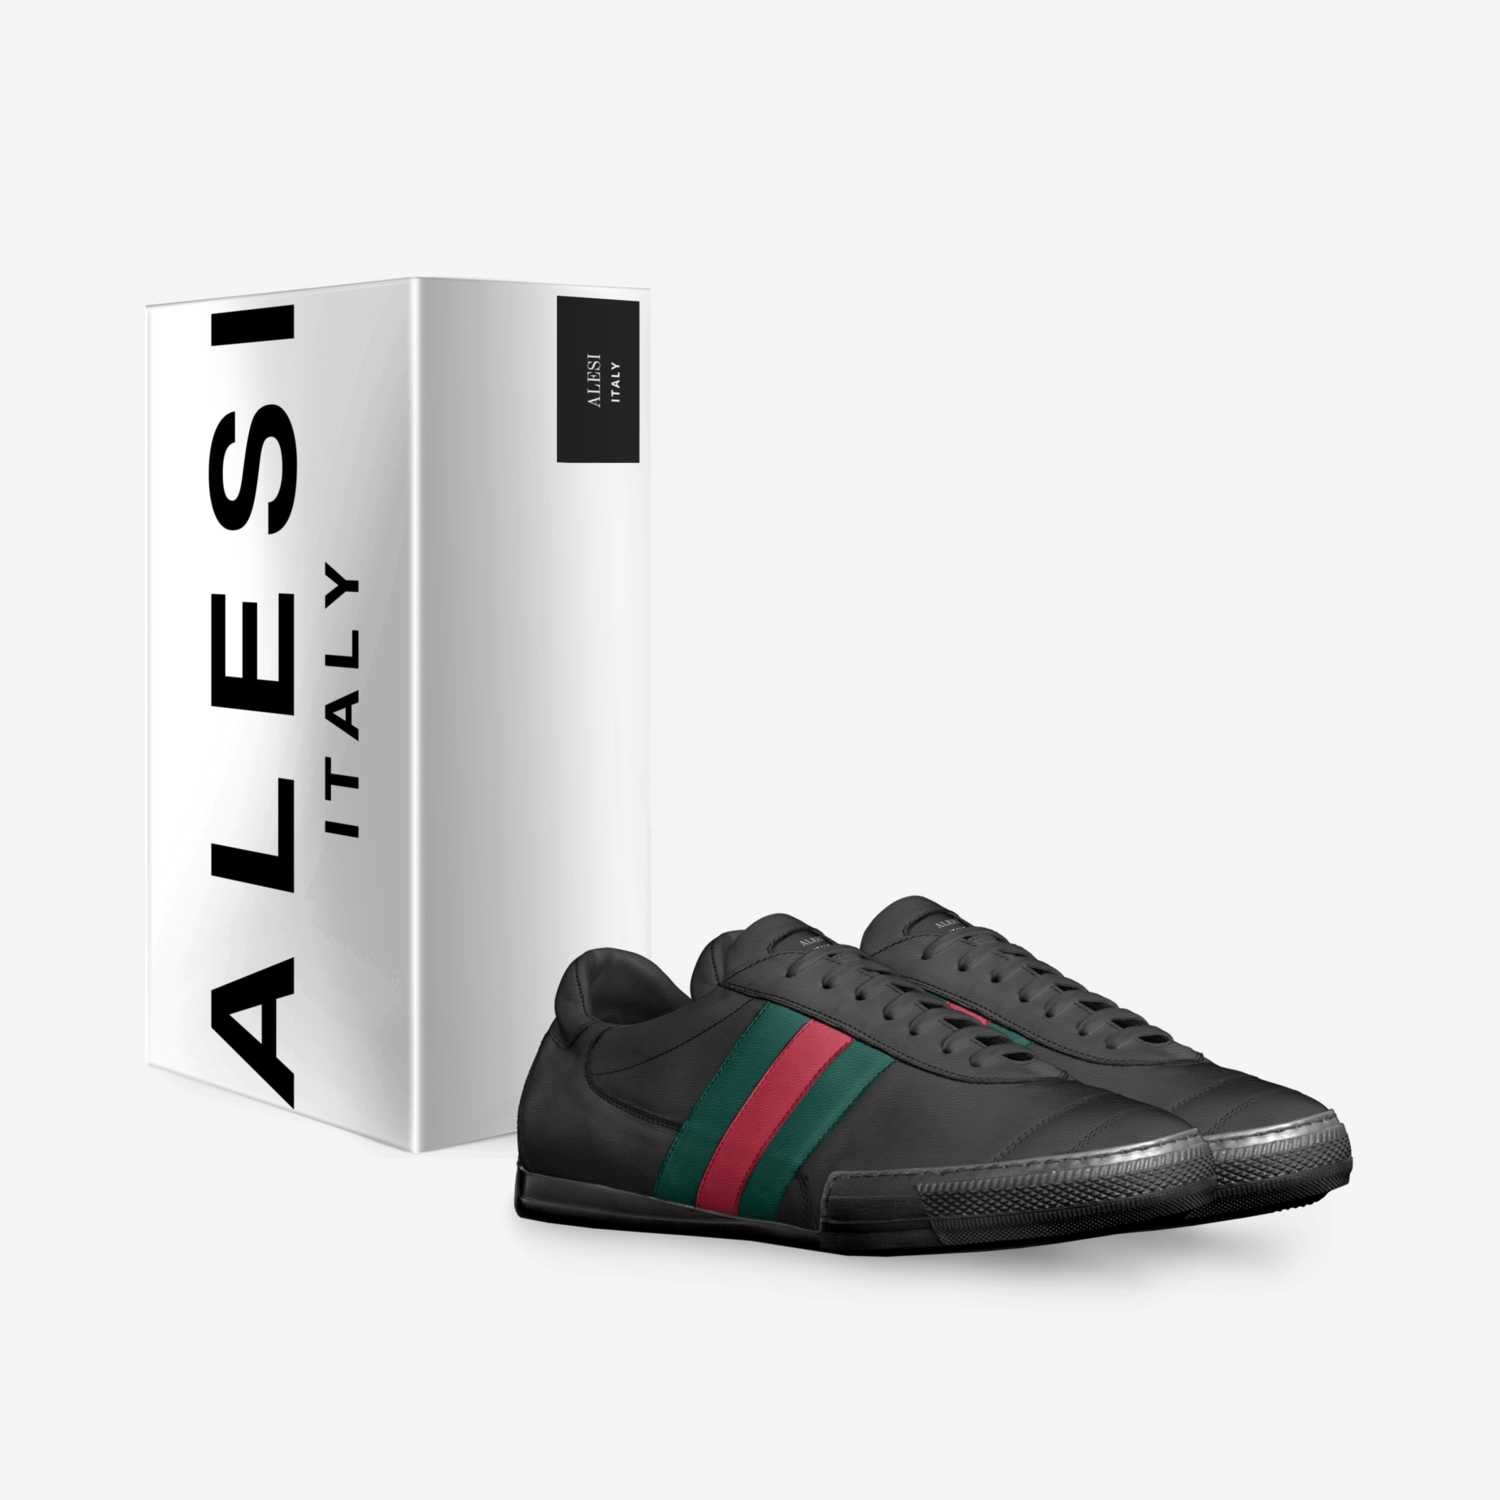 ALESI SOCCER custom made in Italy shoes by Lonanthony Parker | Box view